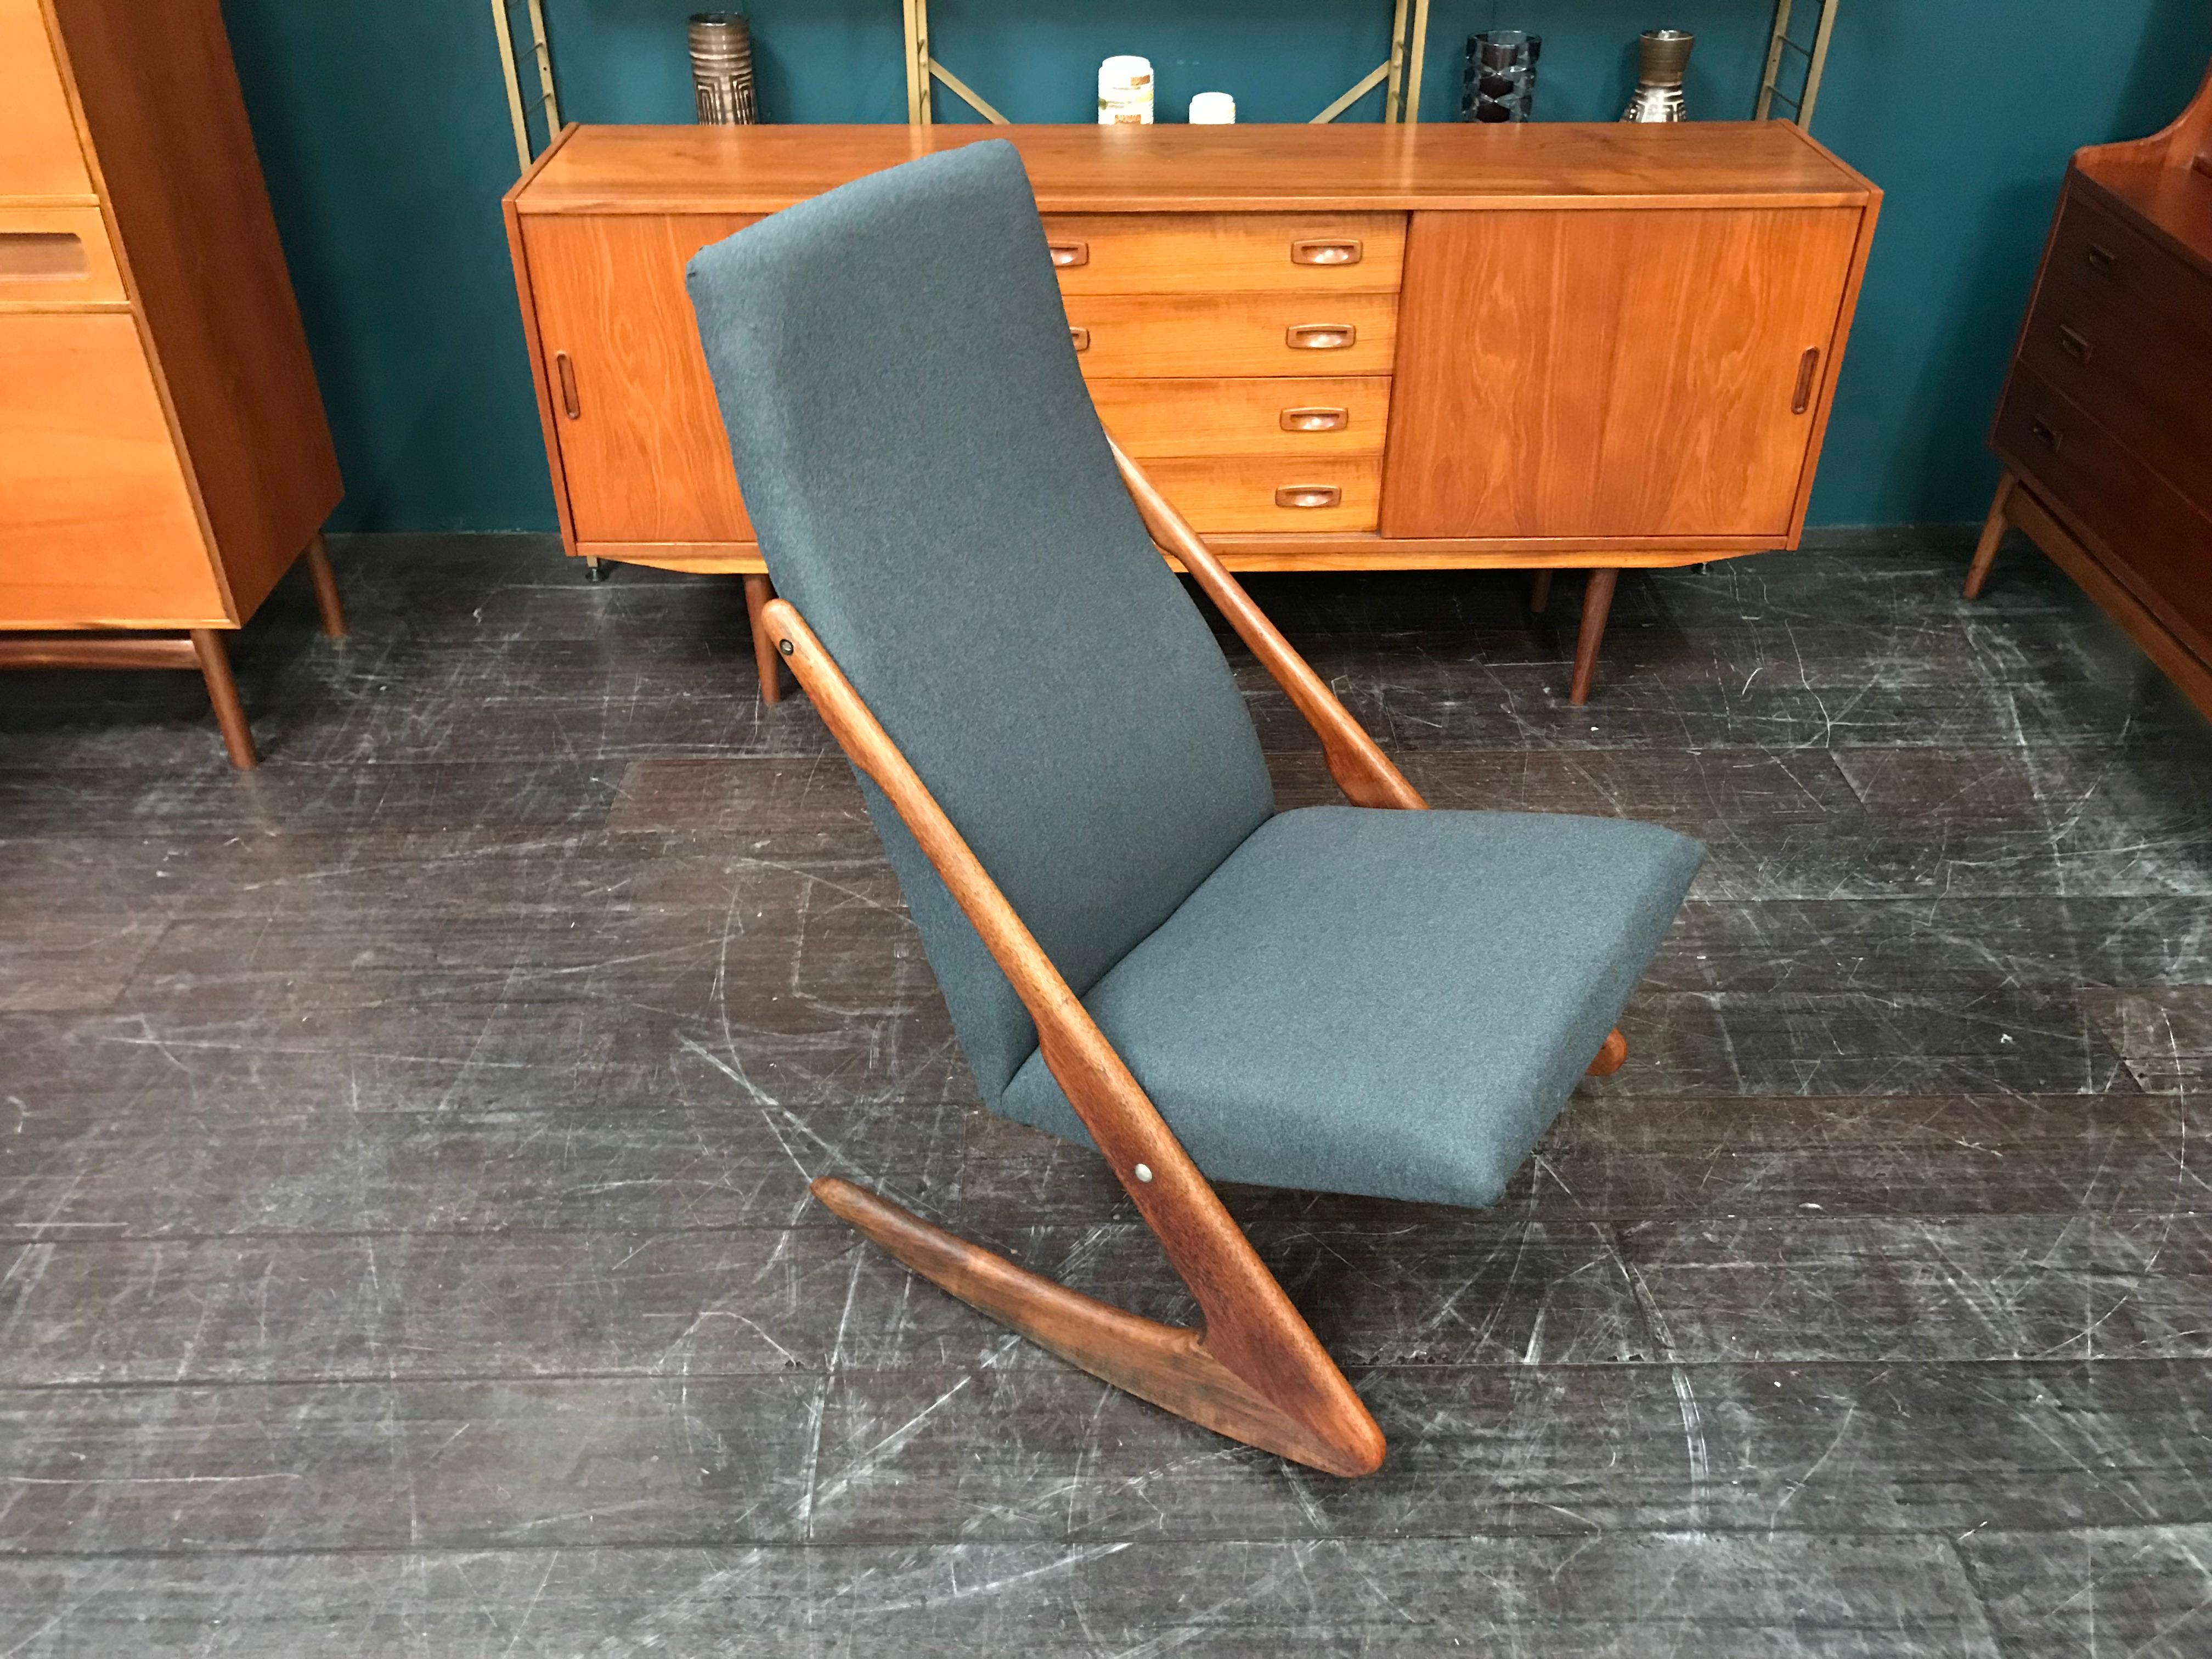 An iconic ‘Boomerang’ chair by Danish manufacturer Mogens Kold. This vintage midcentury chair was designed in the late 1950s. The solid teak ‘skids’ are integrated into the frame, giving the chair a gorgeous retro look.

Danish furniture maker